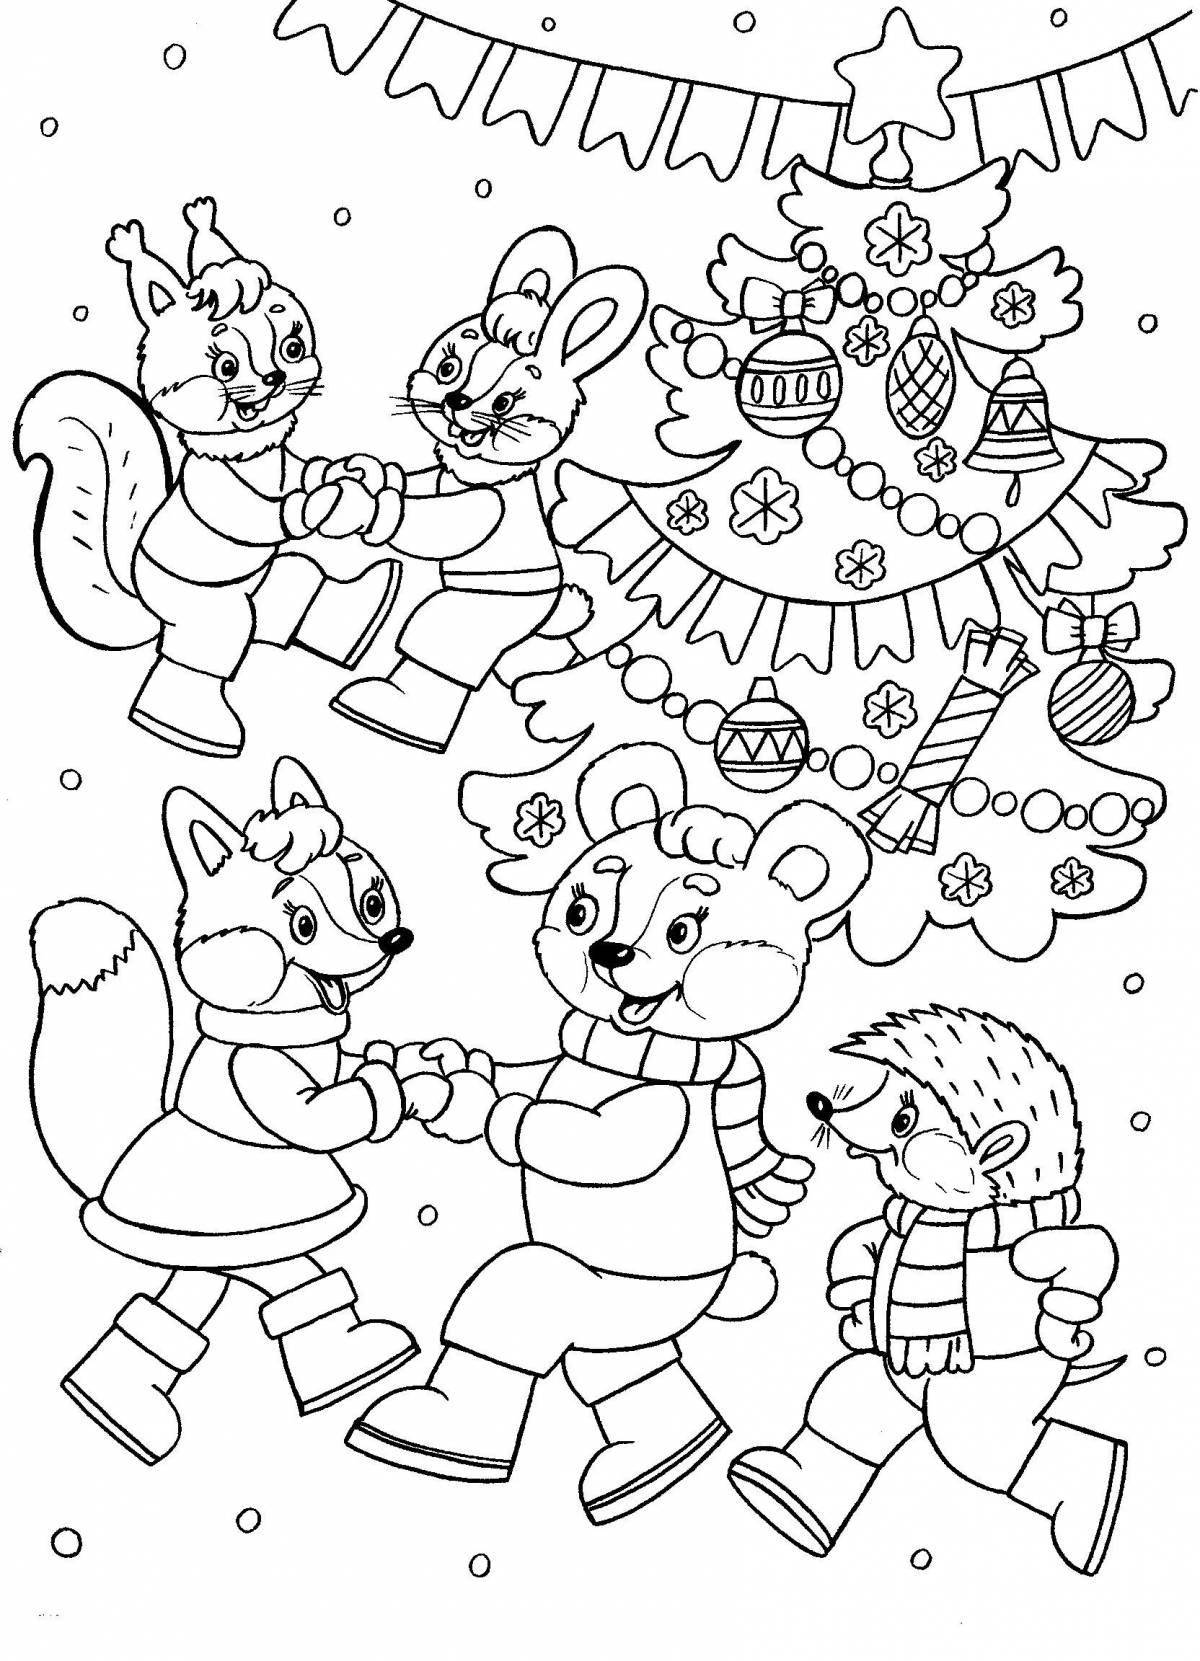 Live Christmas coloring book for kids